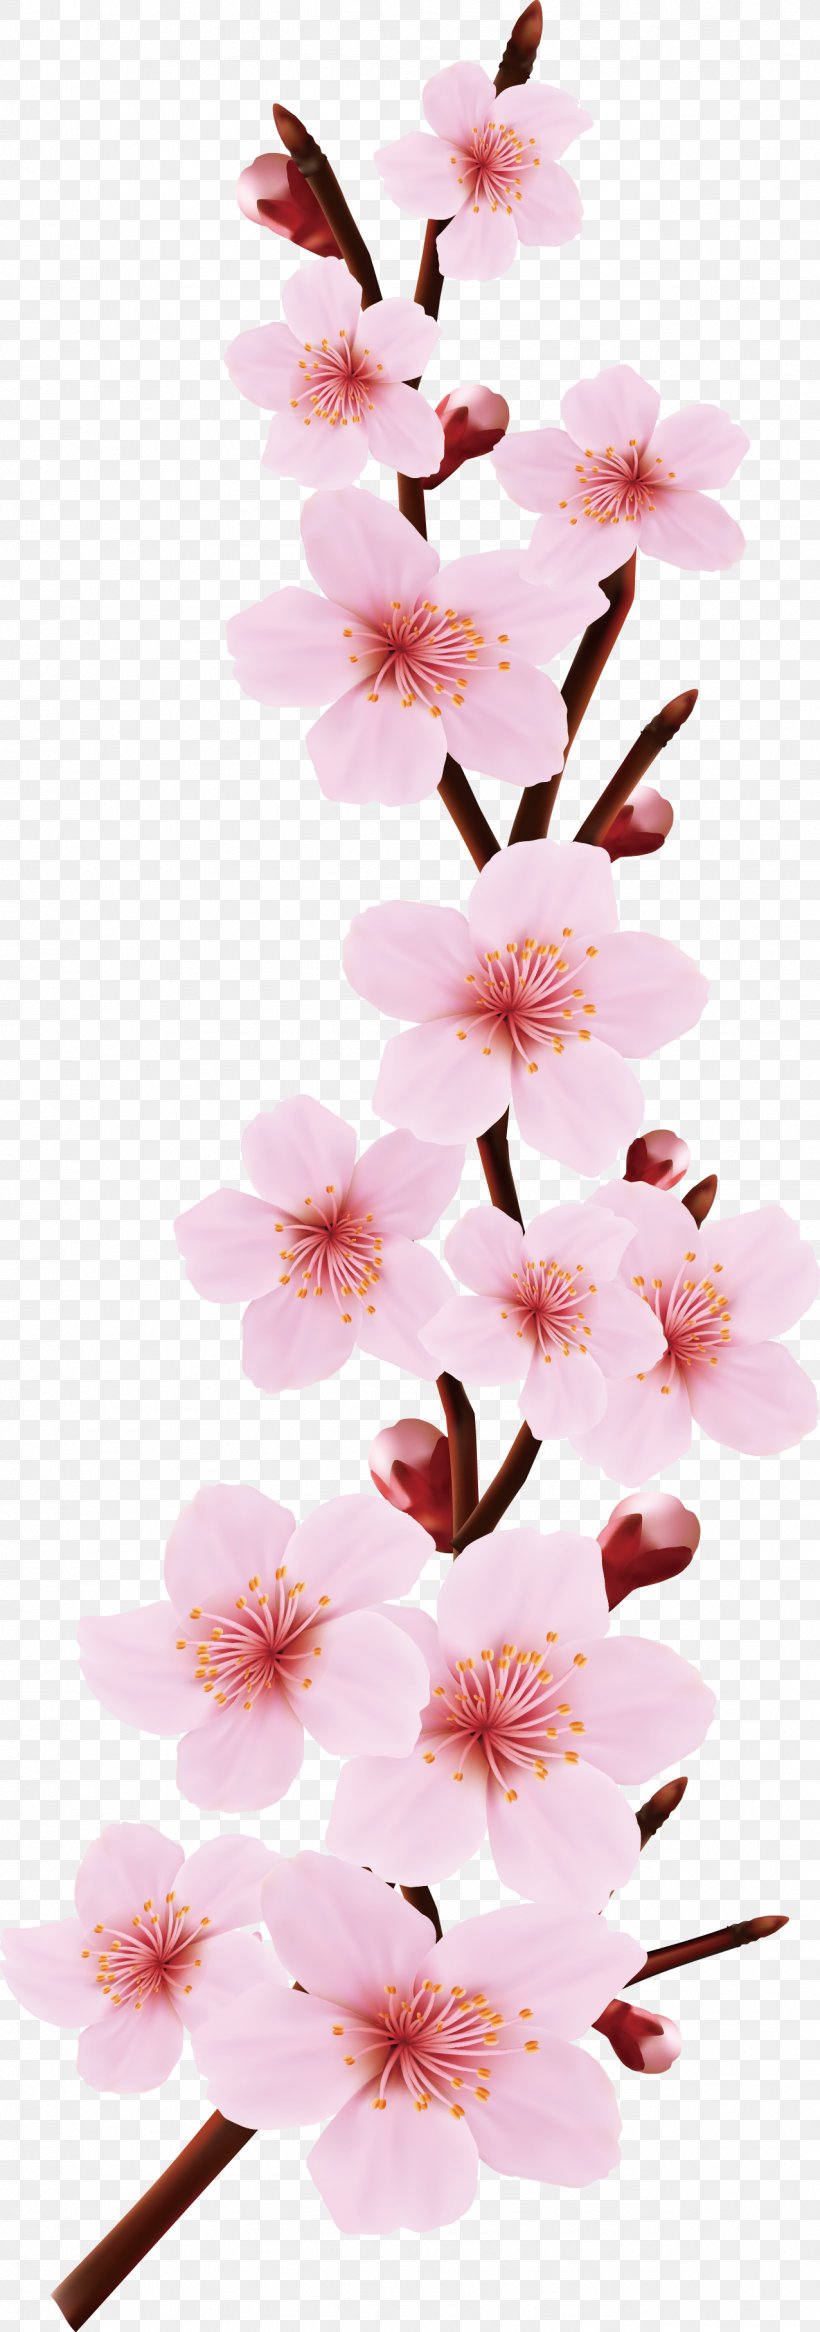 Watercolor Realistic Drawing Of Pink And White Flowers With Leaves On White  Background Stock Photo Picture and Royalty Free Image Image 142297713